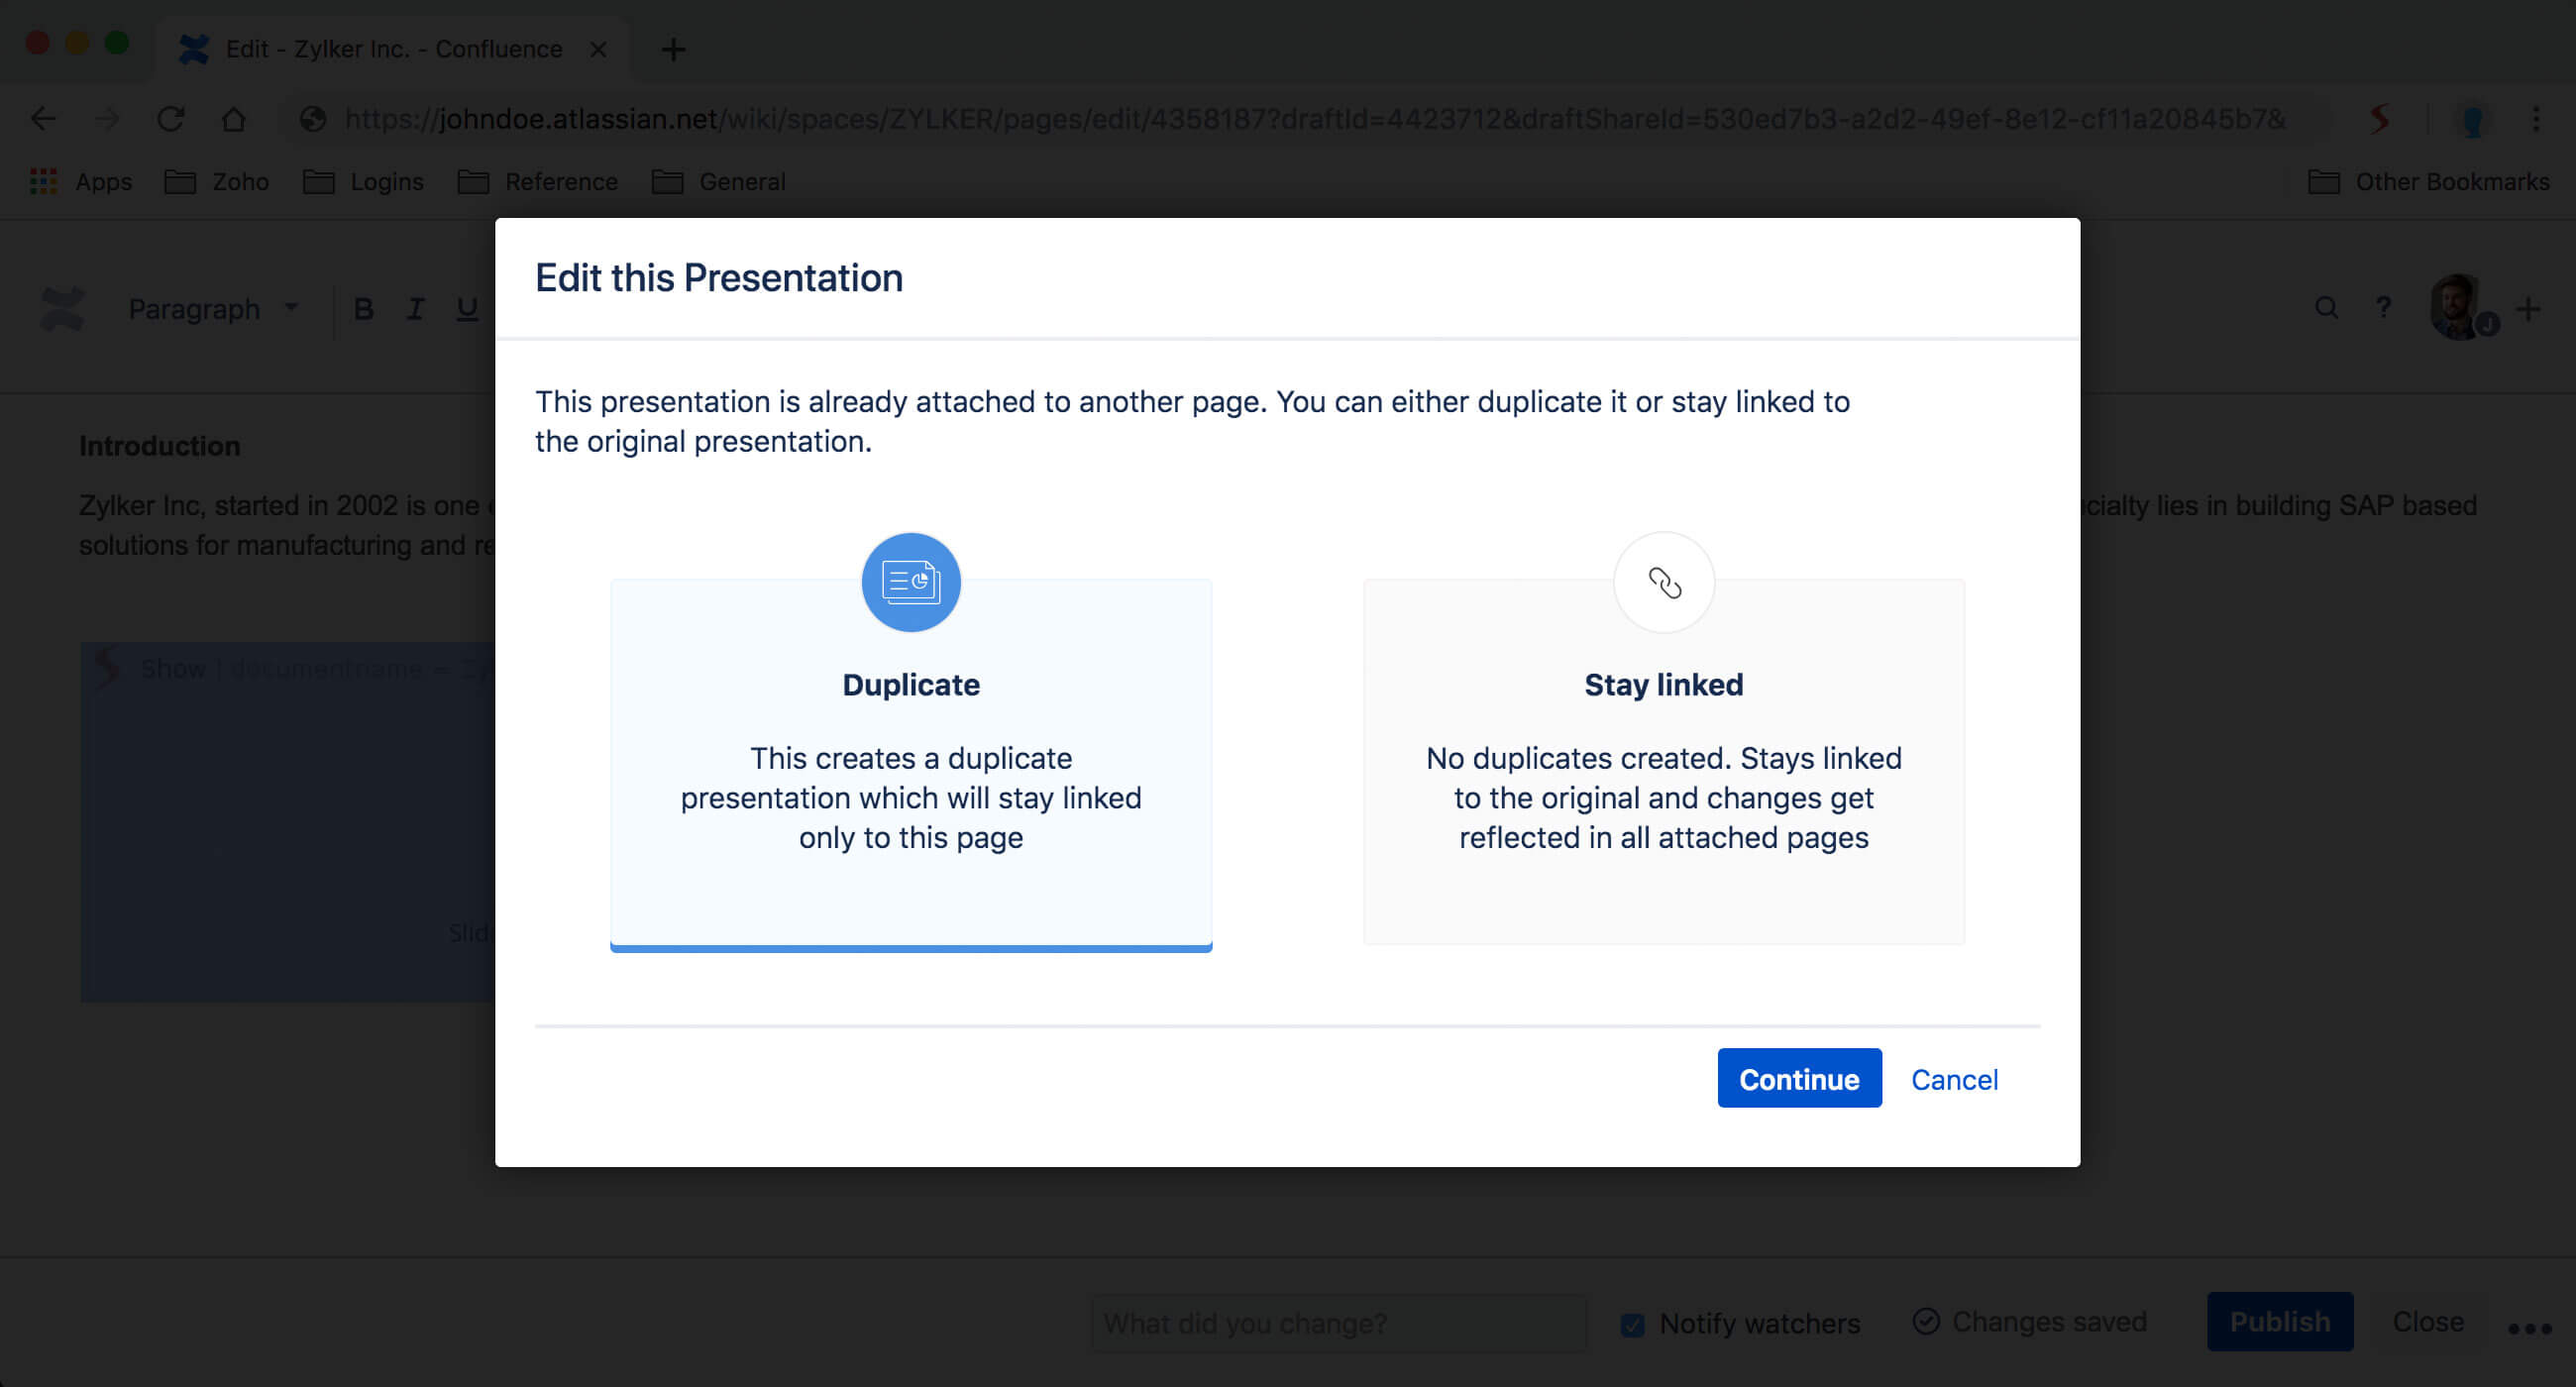 Stay synced with your existing presentation in Confluence.